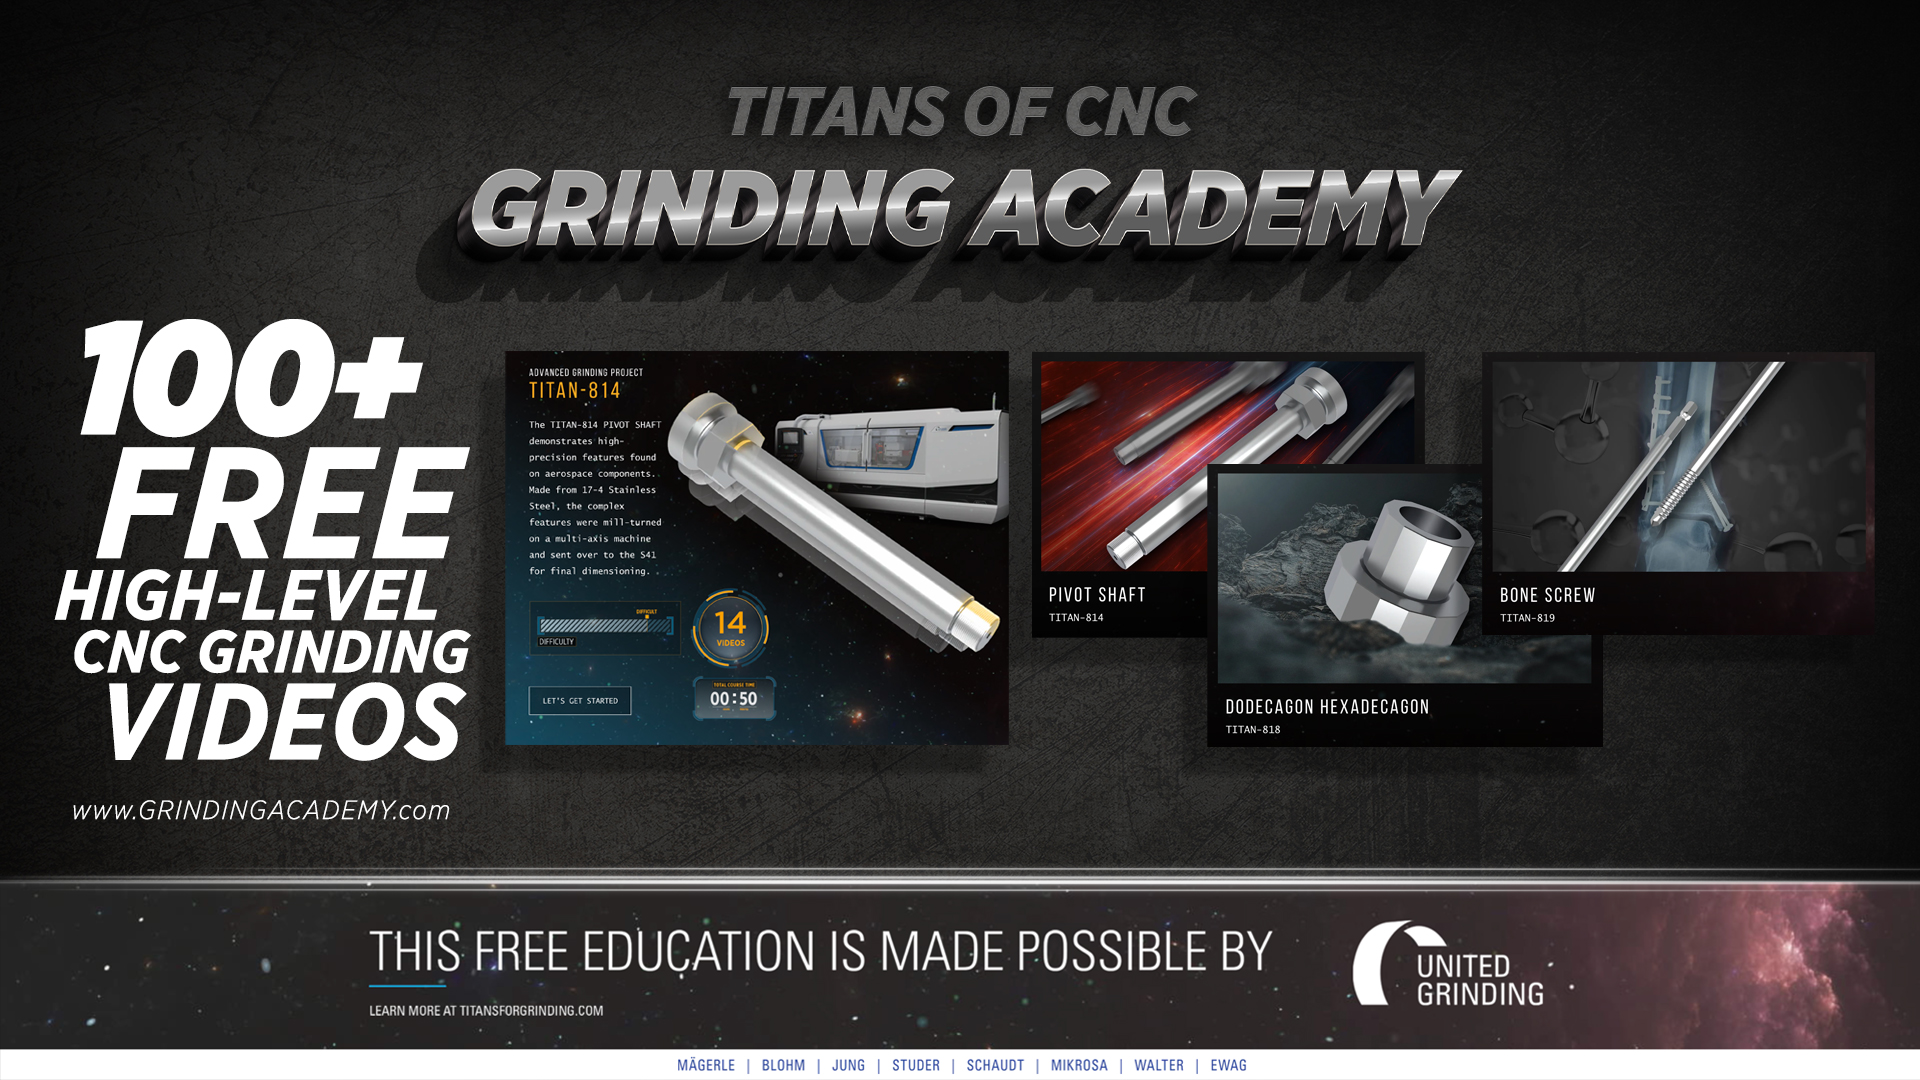 Free online courses at the Grinding Academy